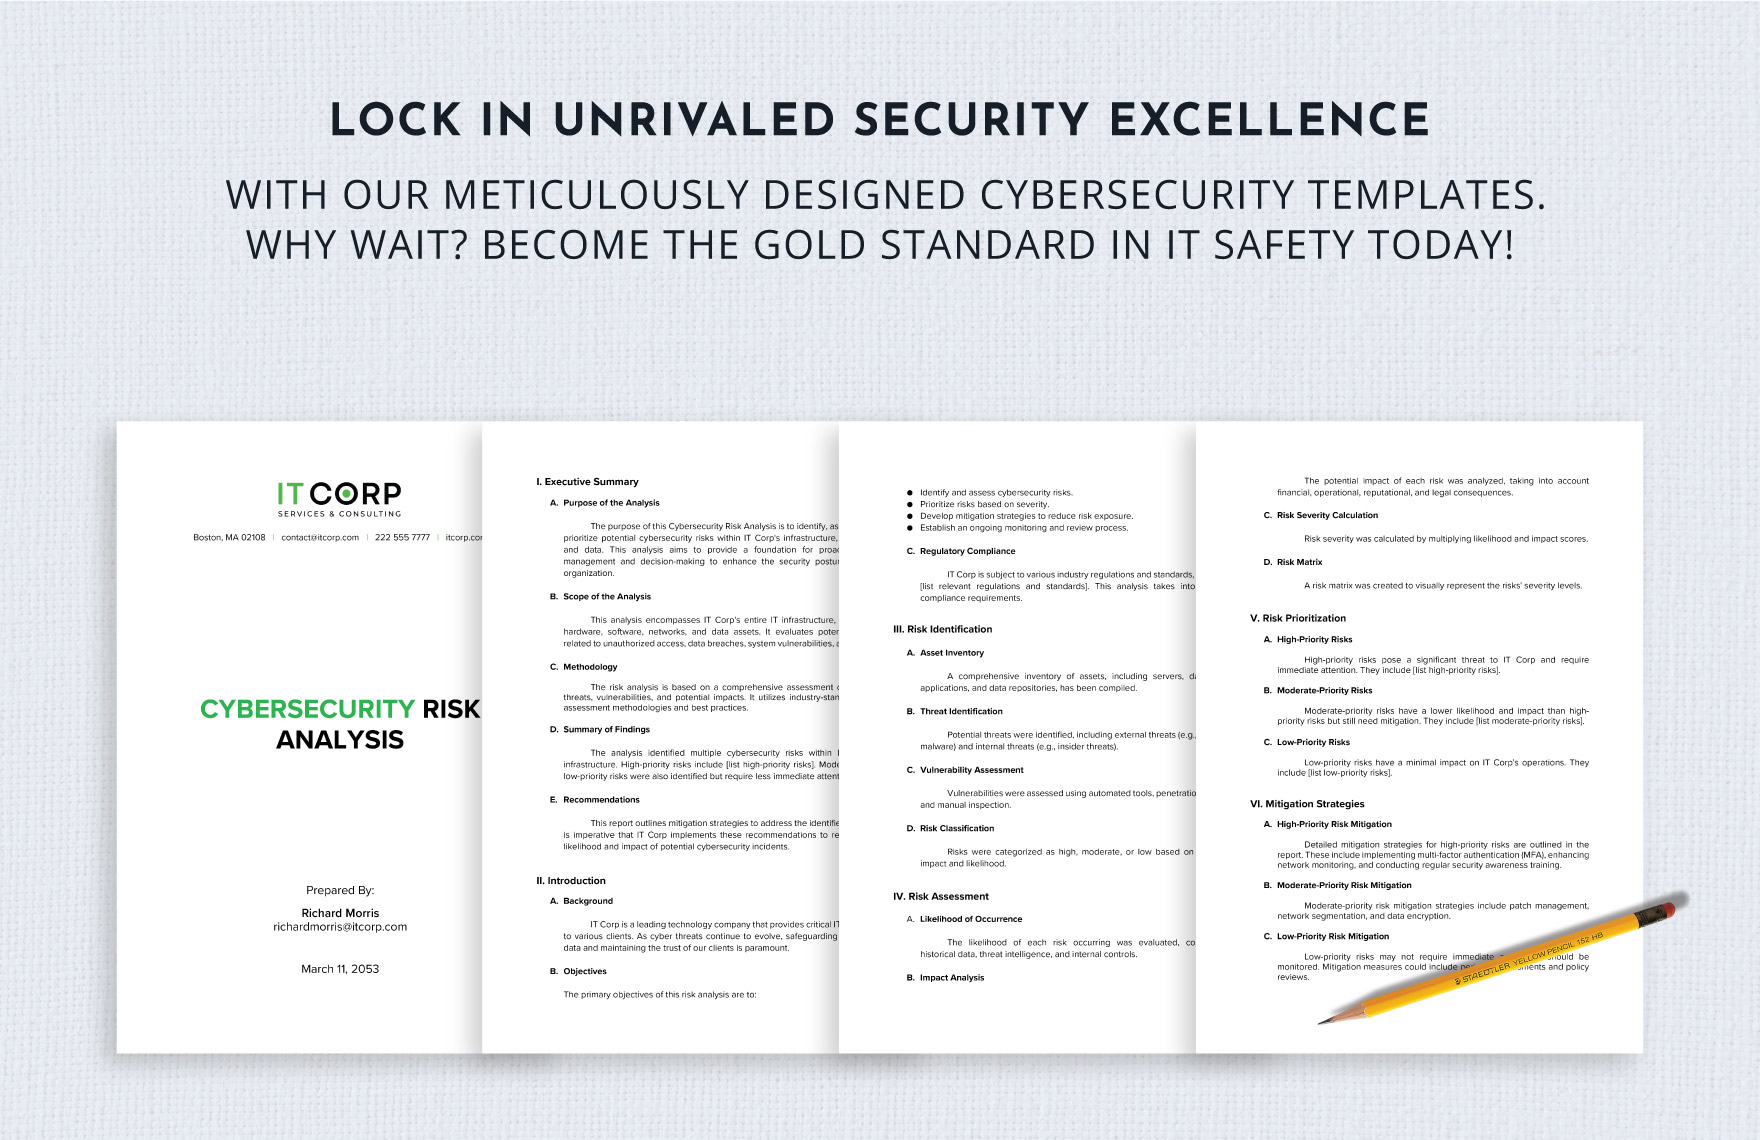 Cybersecurity Risk Analysis Template